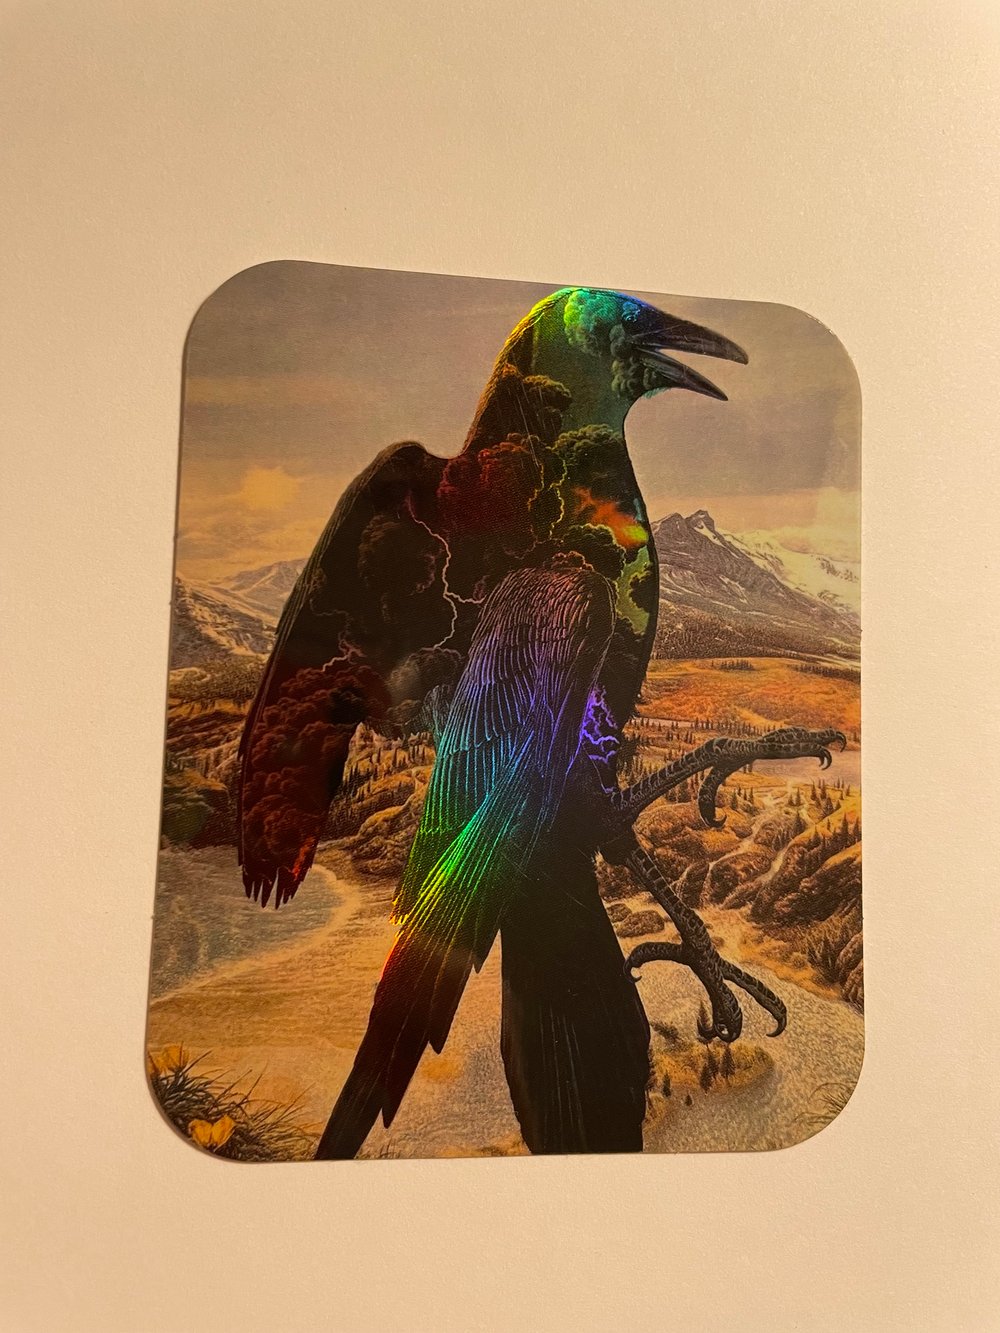 Duality in nature Holographic sticker 